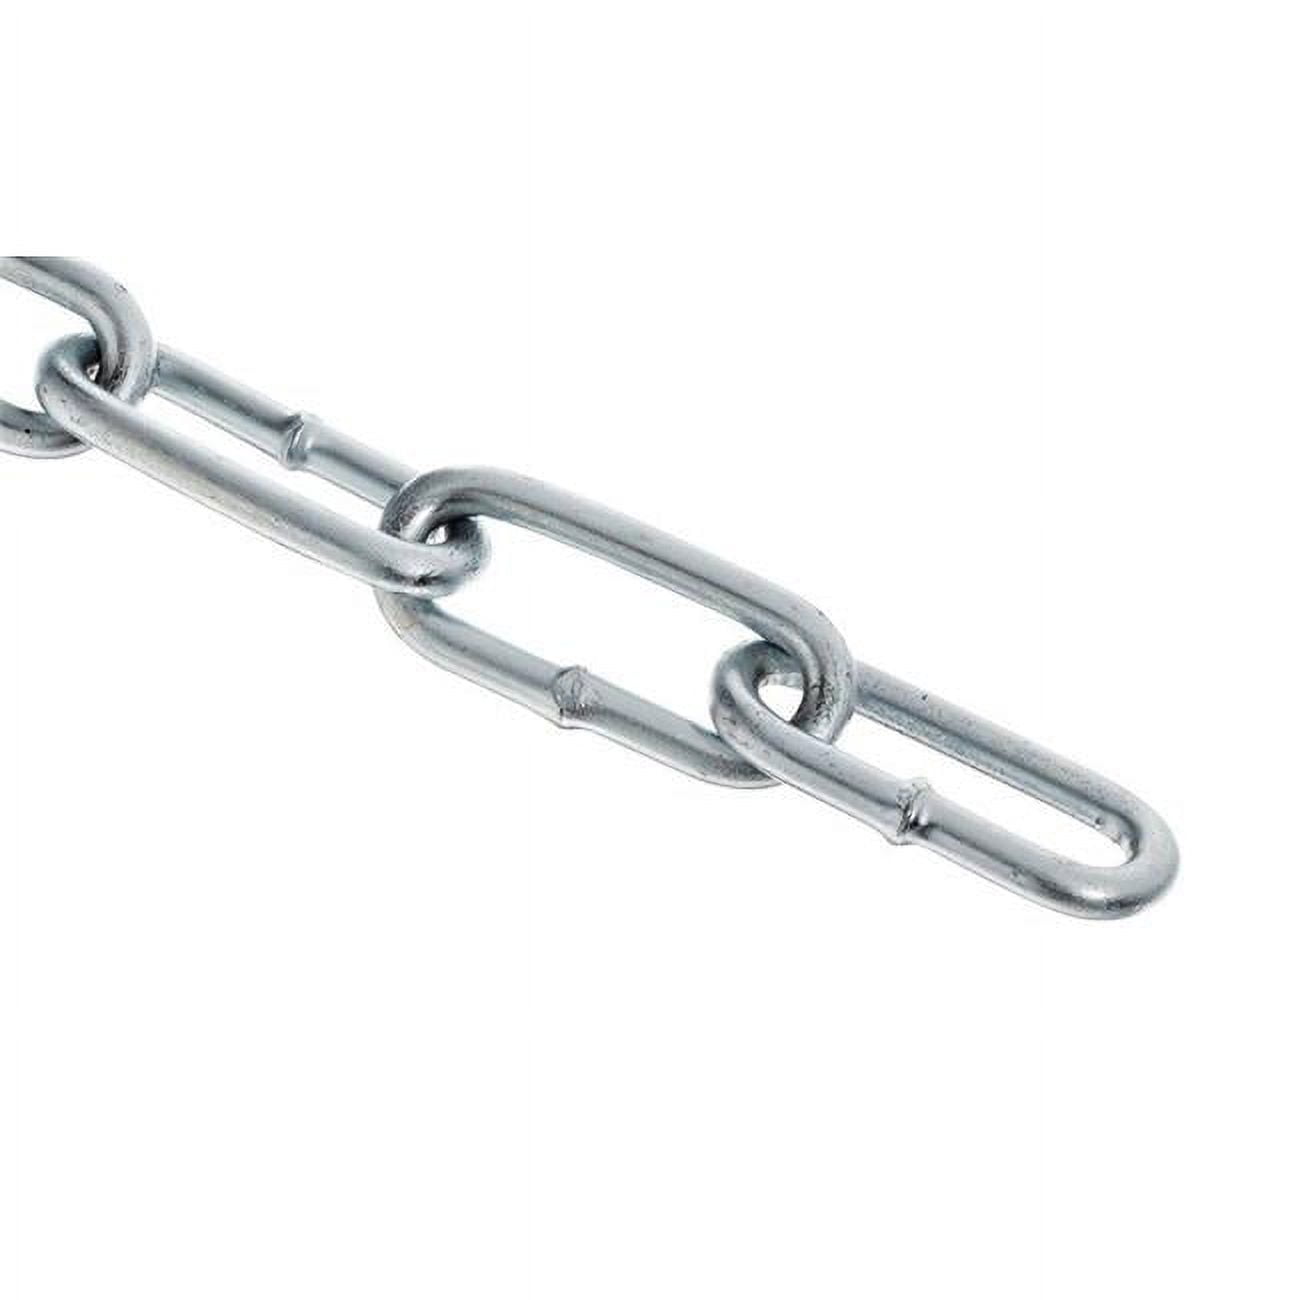 5006132 1 Single Loop Carbon Steel Chain, 0.11 In. Dia. X 125 Ft. - Gray